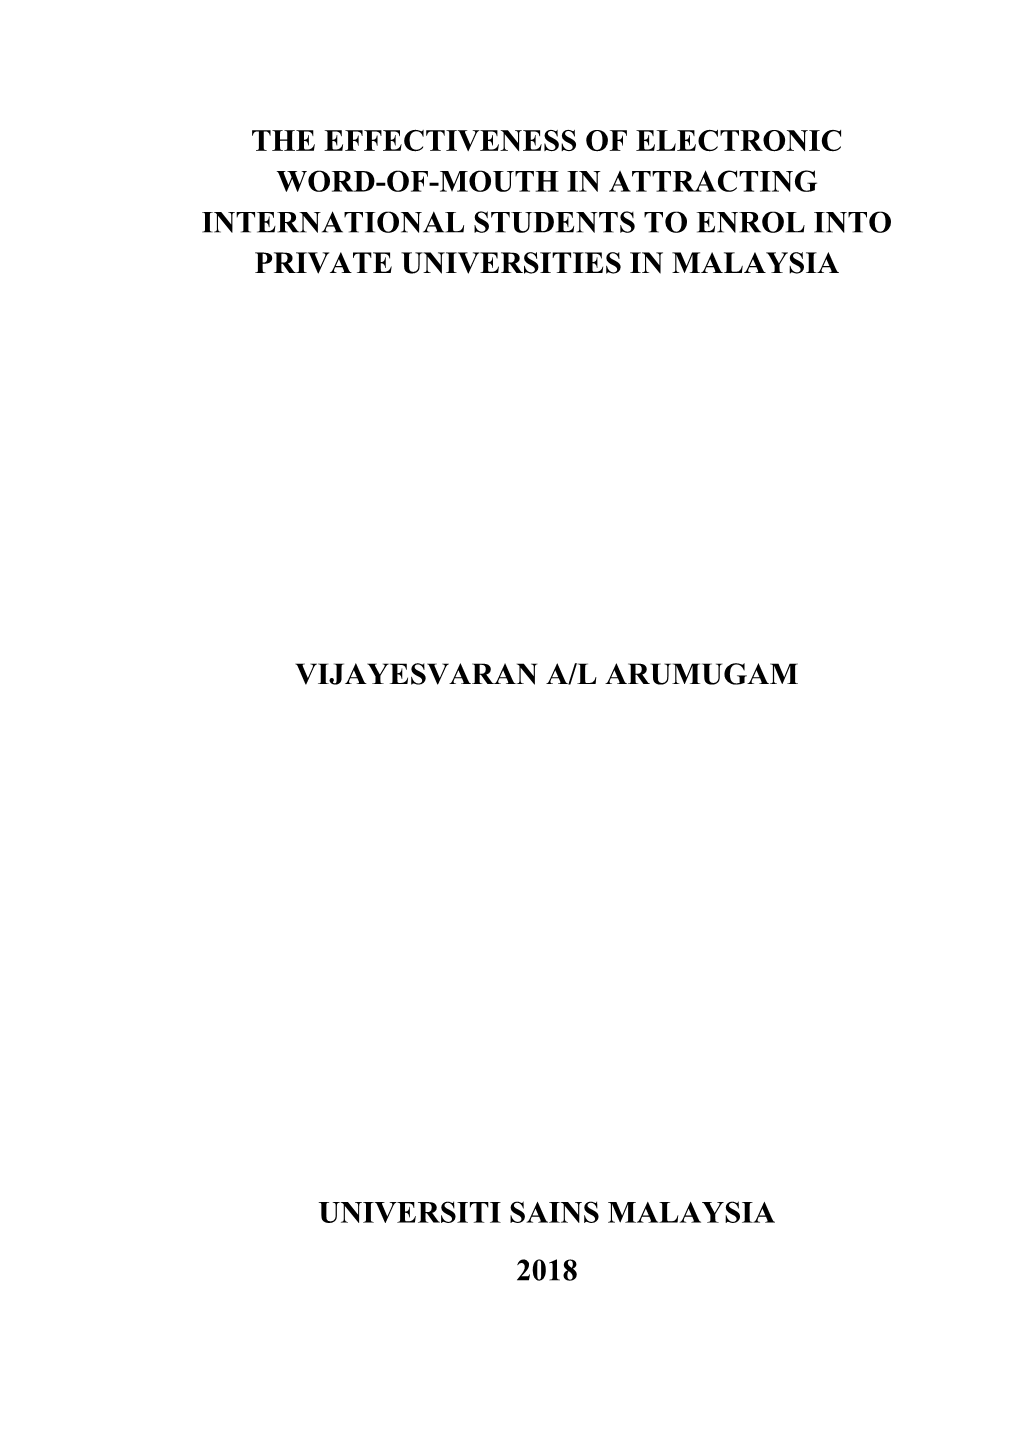 The Effectiveness of Electronic Word-Of-Mouth in Attracting International Students to Enrol Into Private Universities in Malaysia